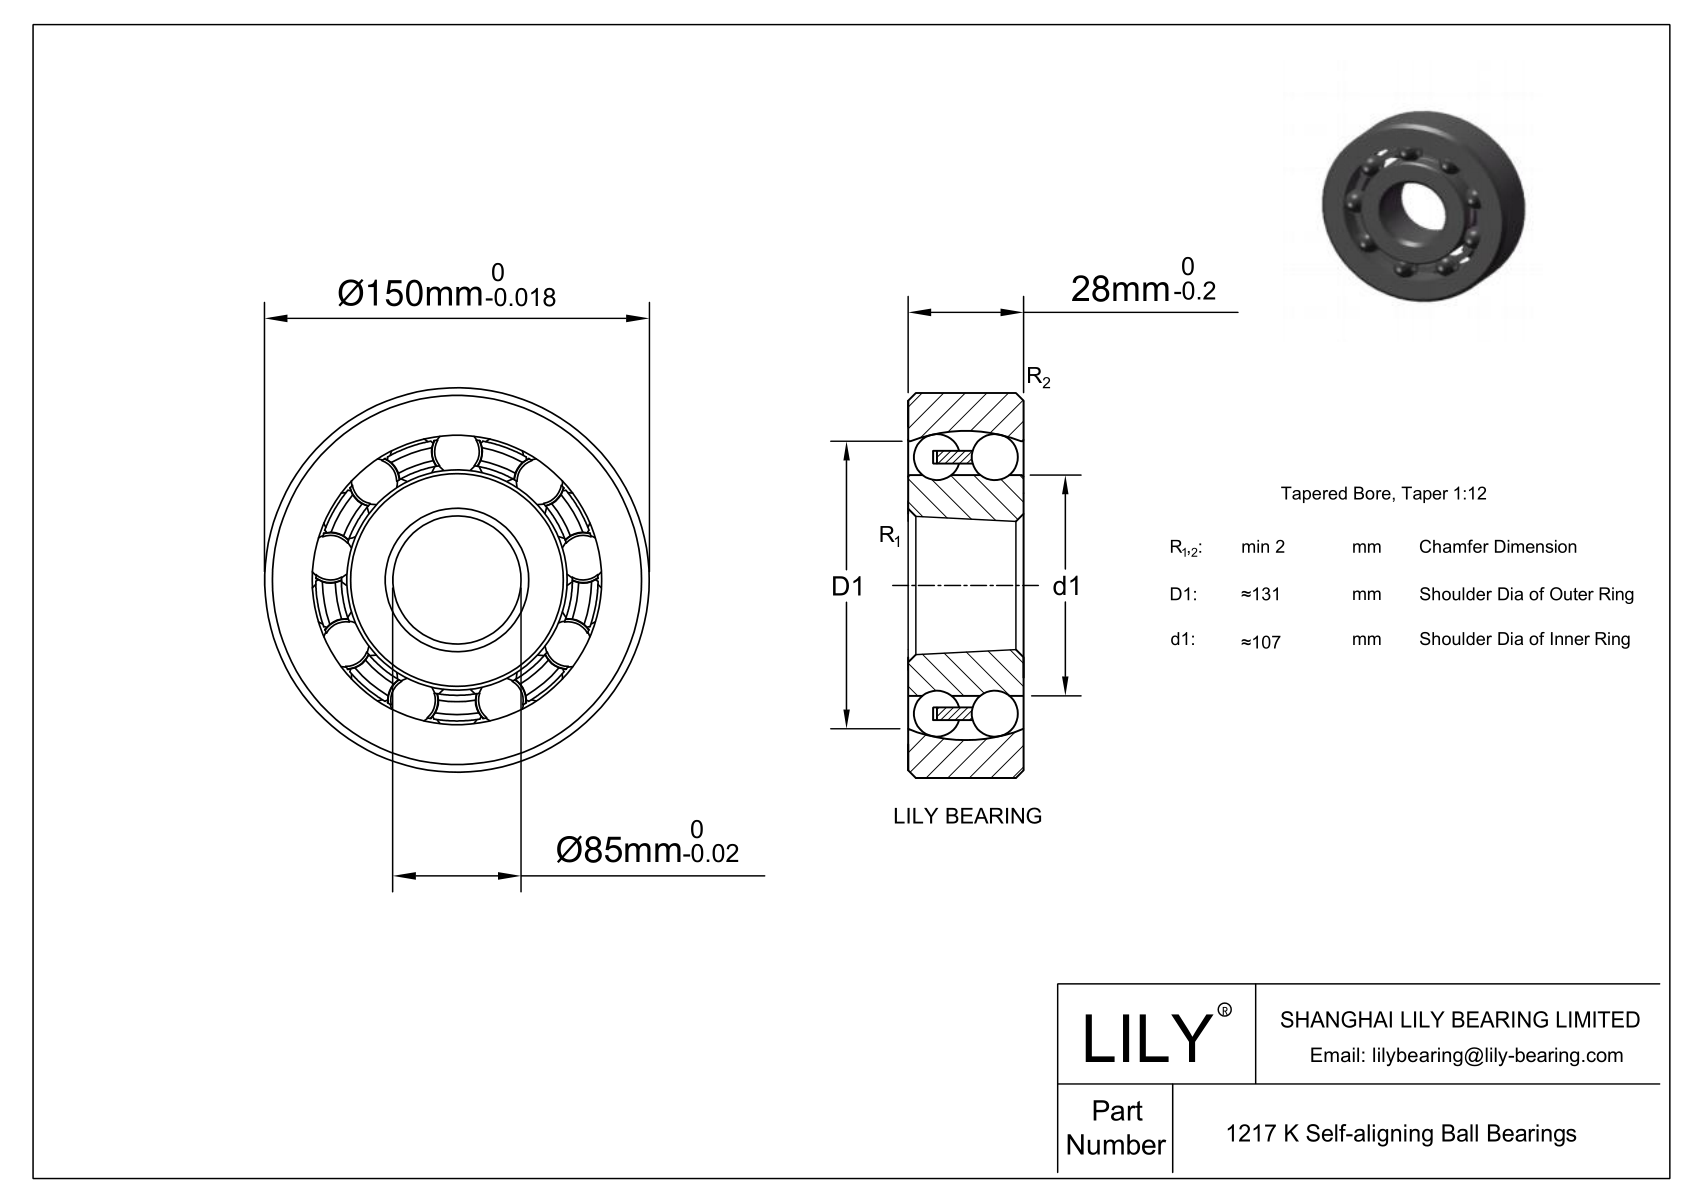 S1217 K Stainless Steel Self Aligning Ball Bearings cad drawing